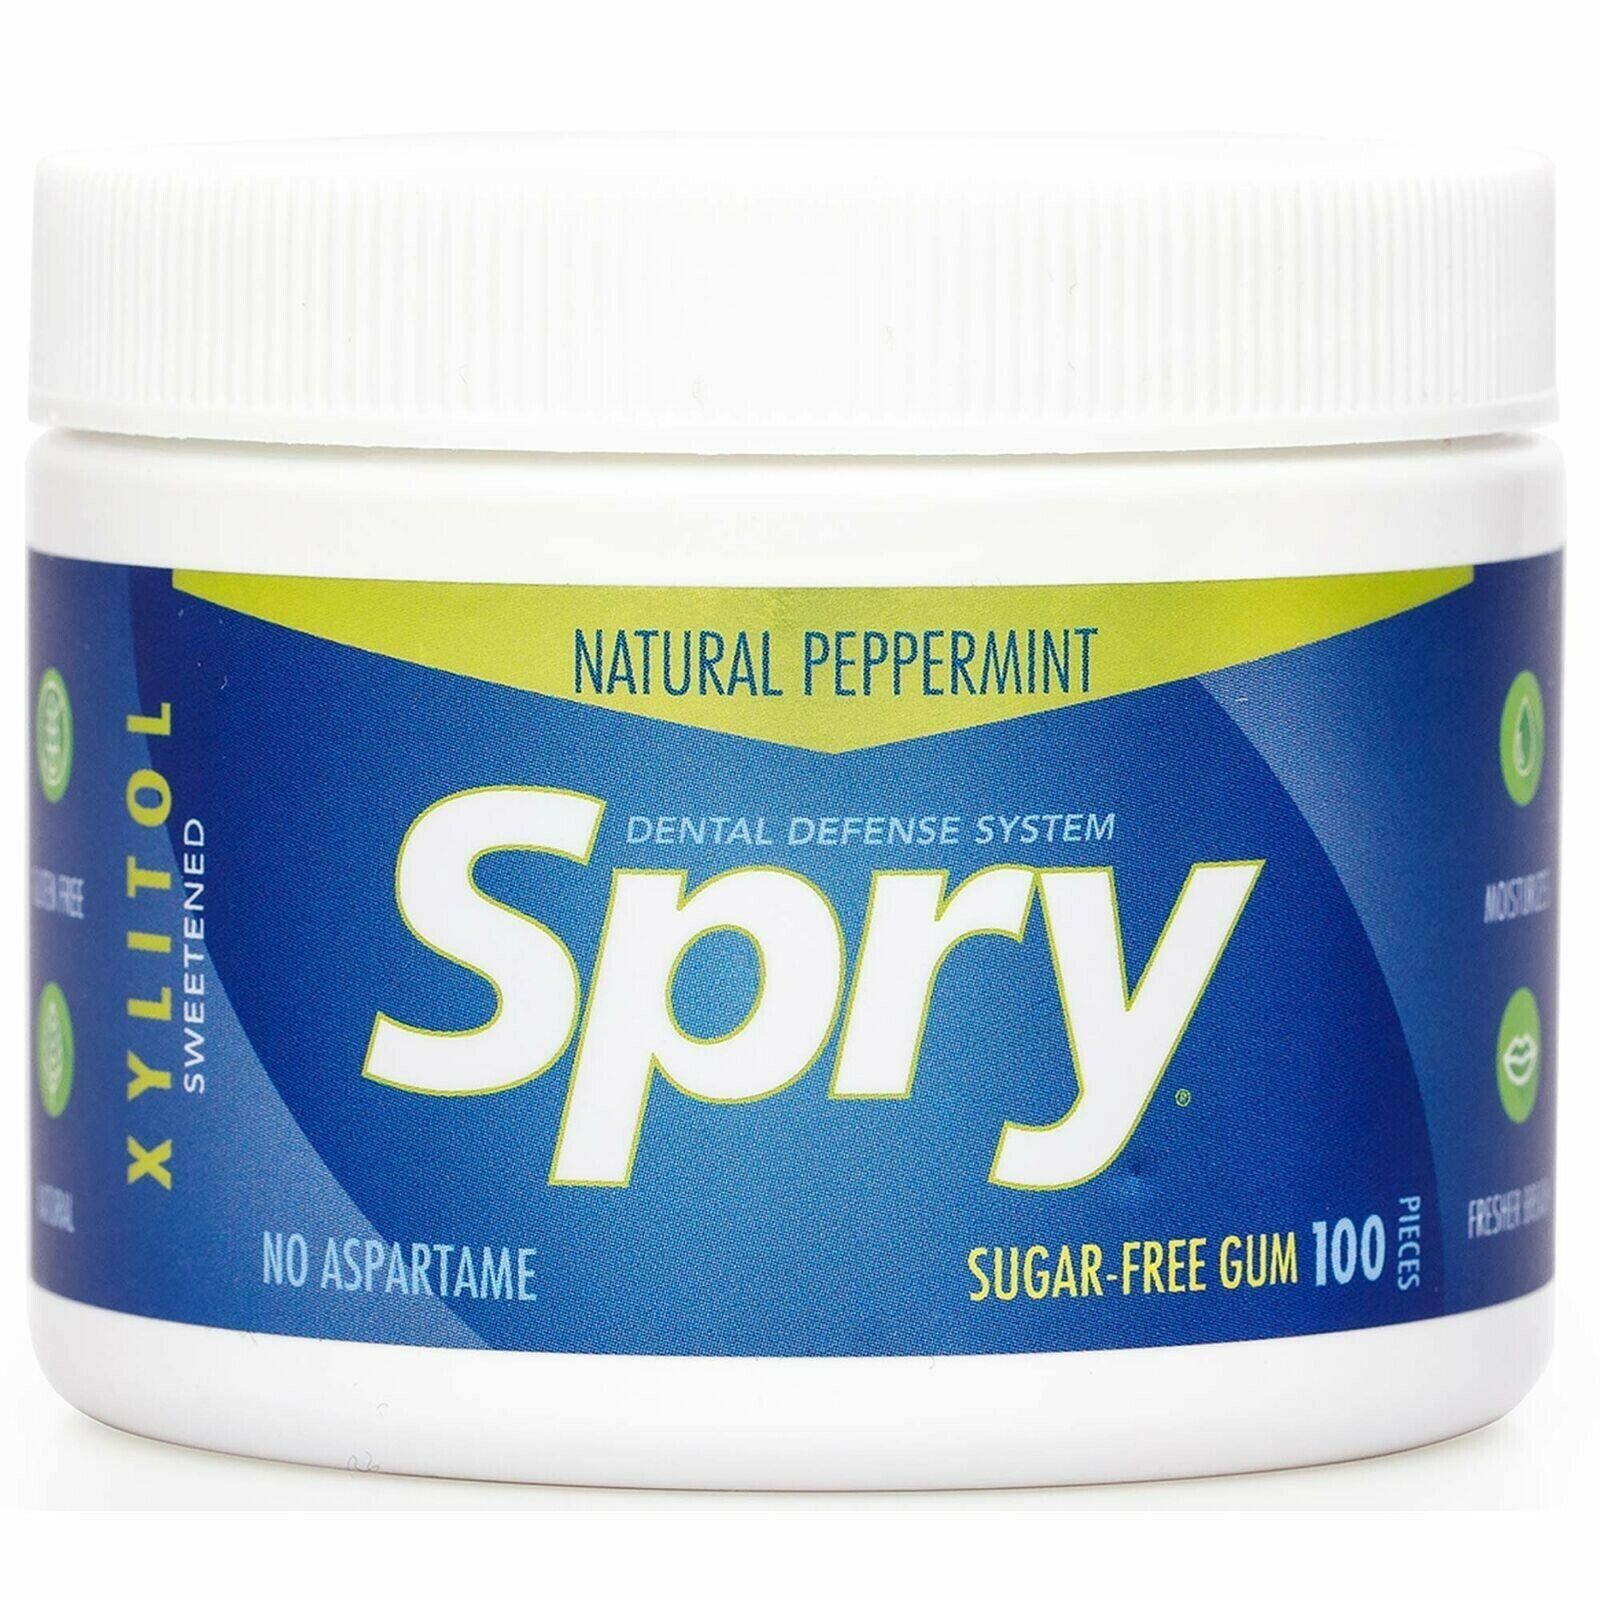 Primary image for Spry Fresh Natural Peppermint Gum, Natural Xylitol Chewing Gum, 100 Count (Pa...